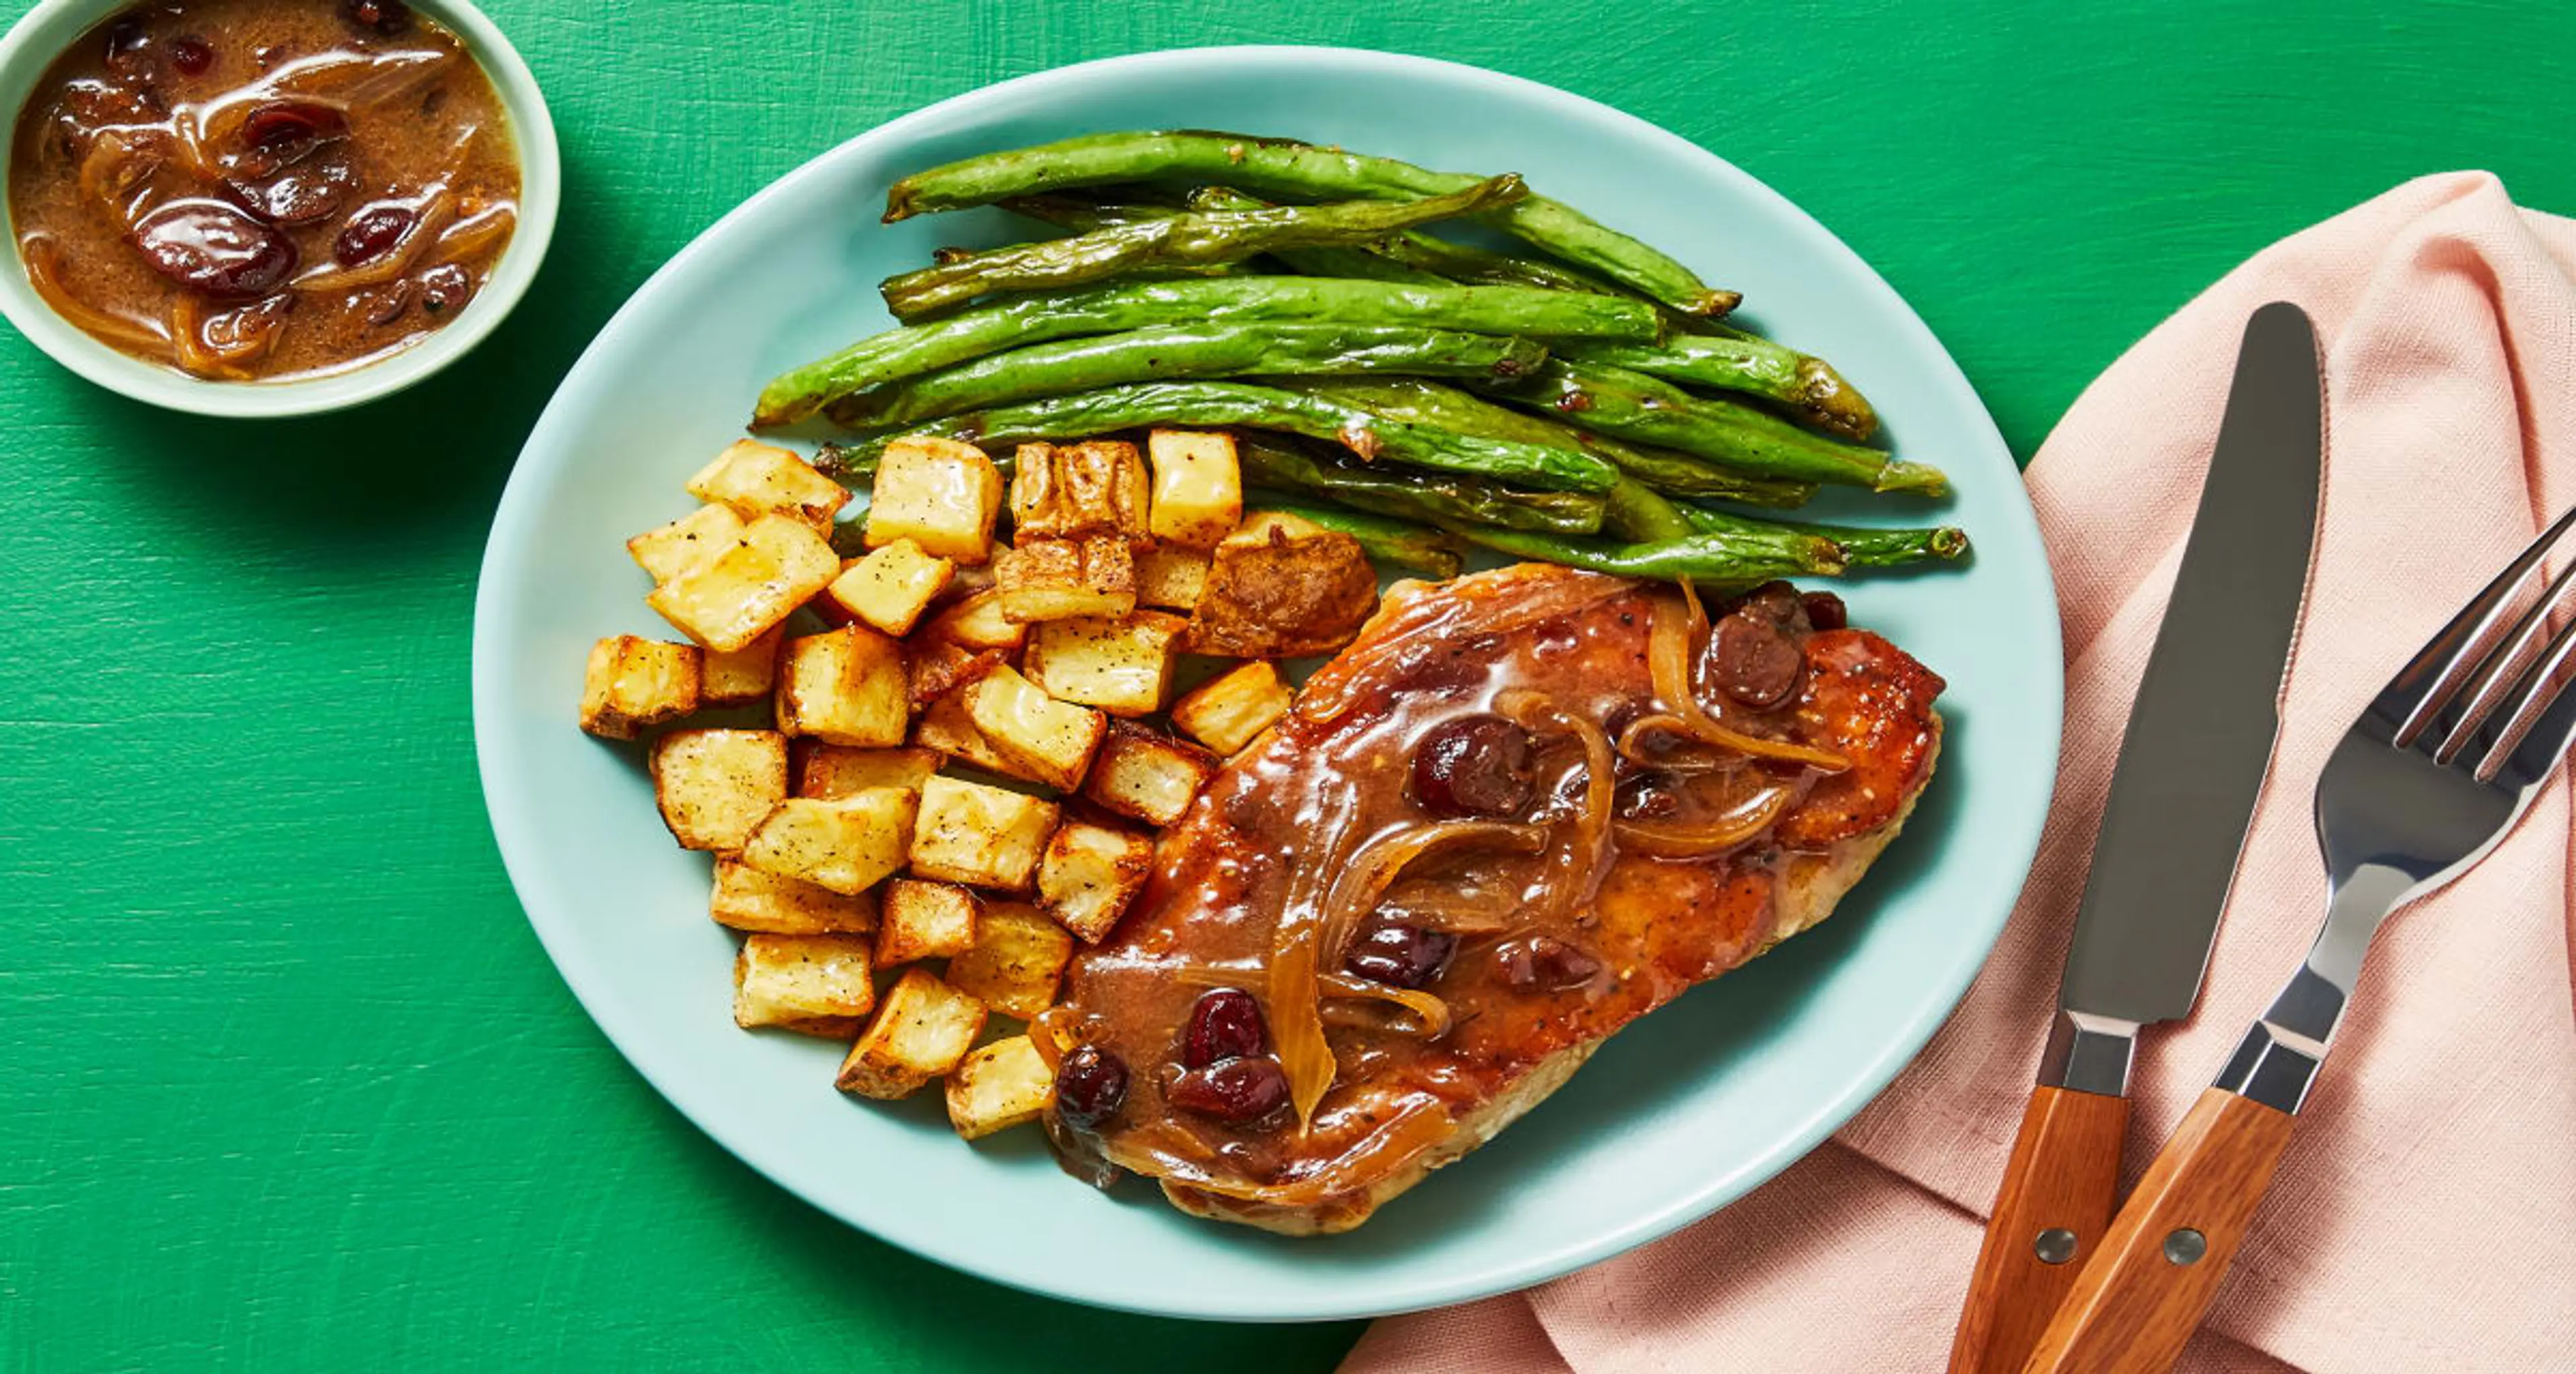 Pork Chops in Cranberry Shallot Sauce with Garlicky Roasted